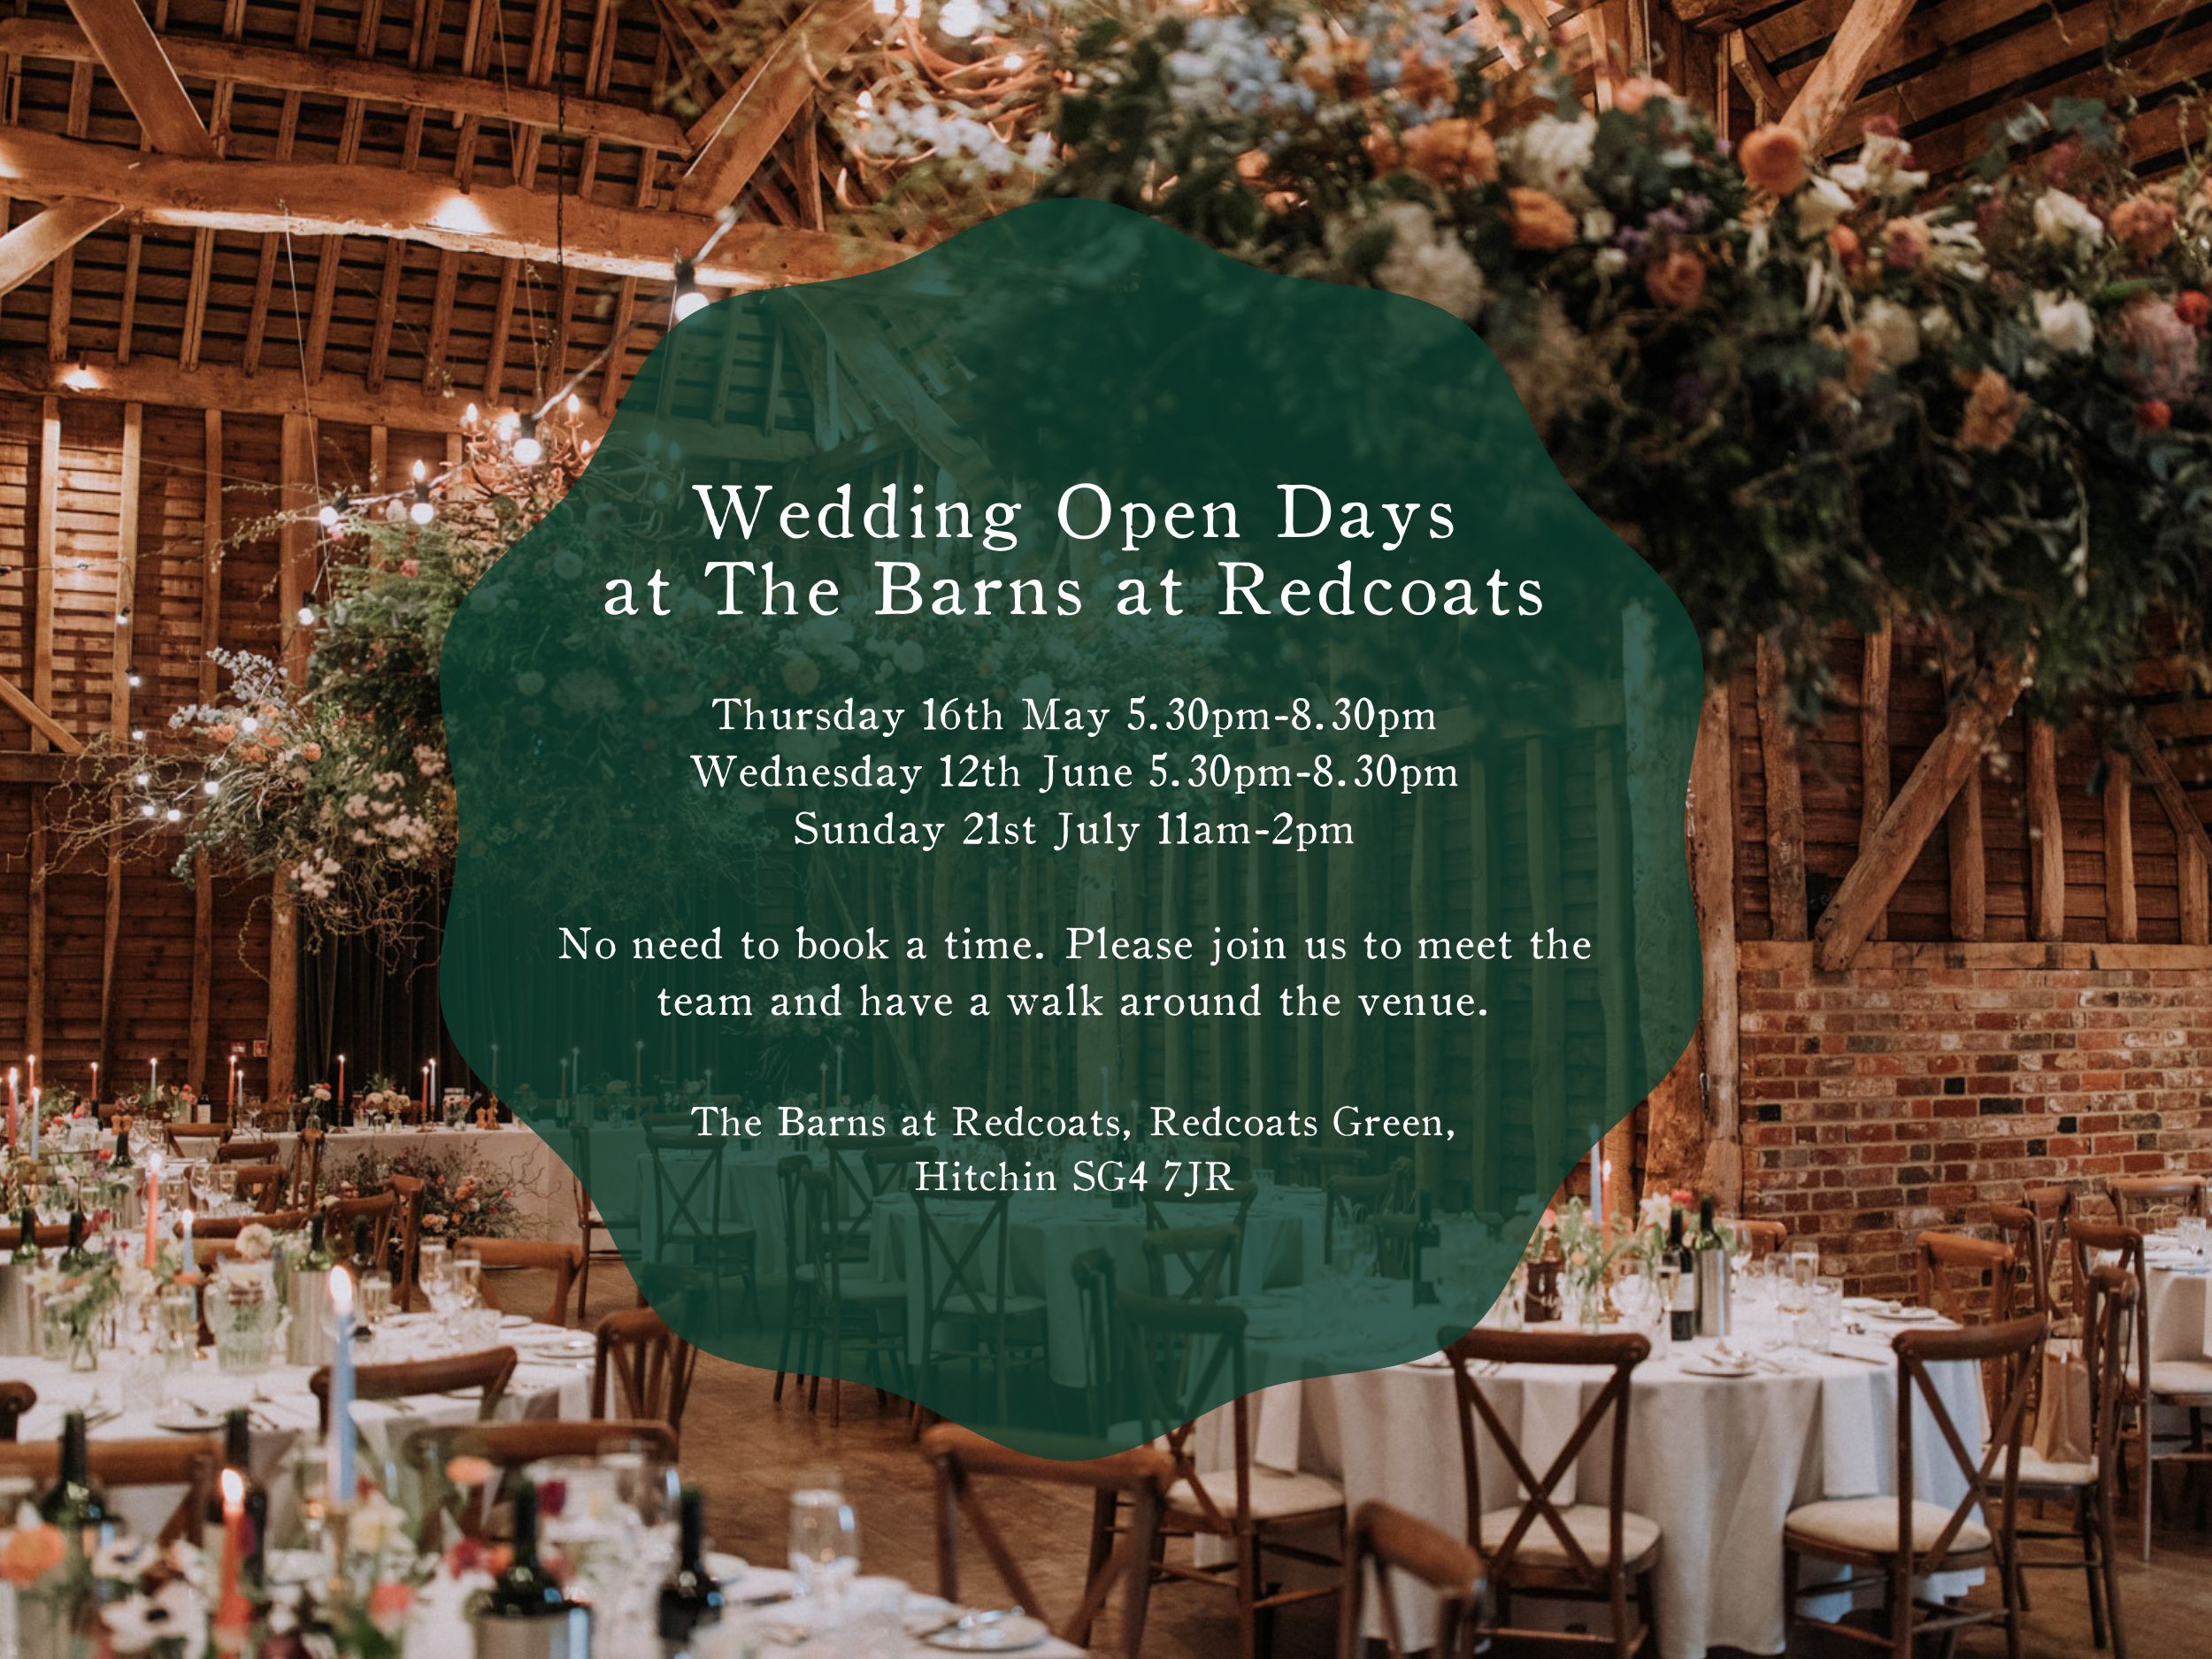 Wedding Open Days at The Barns